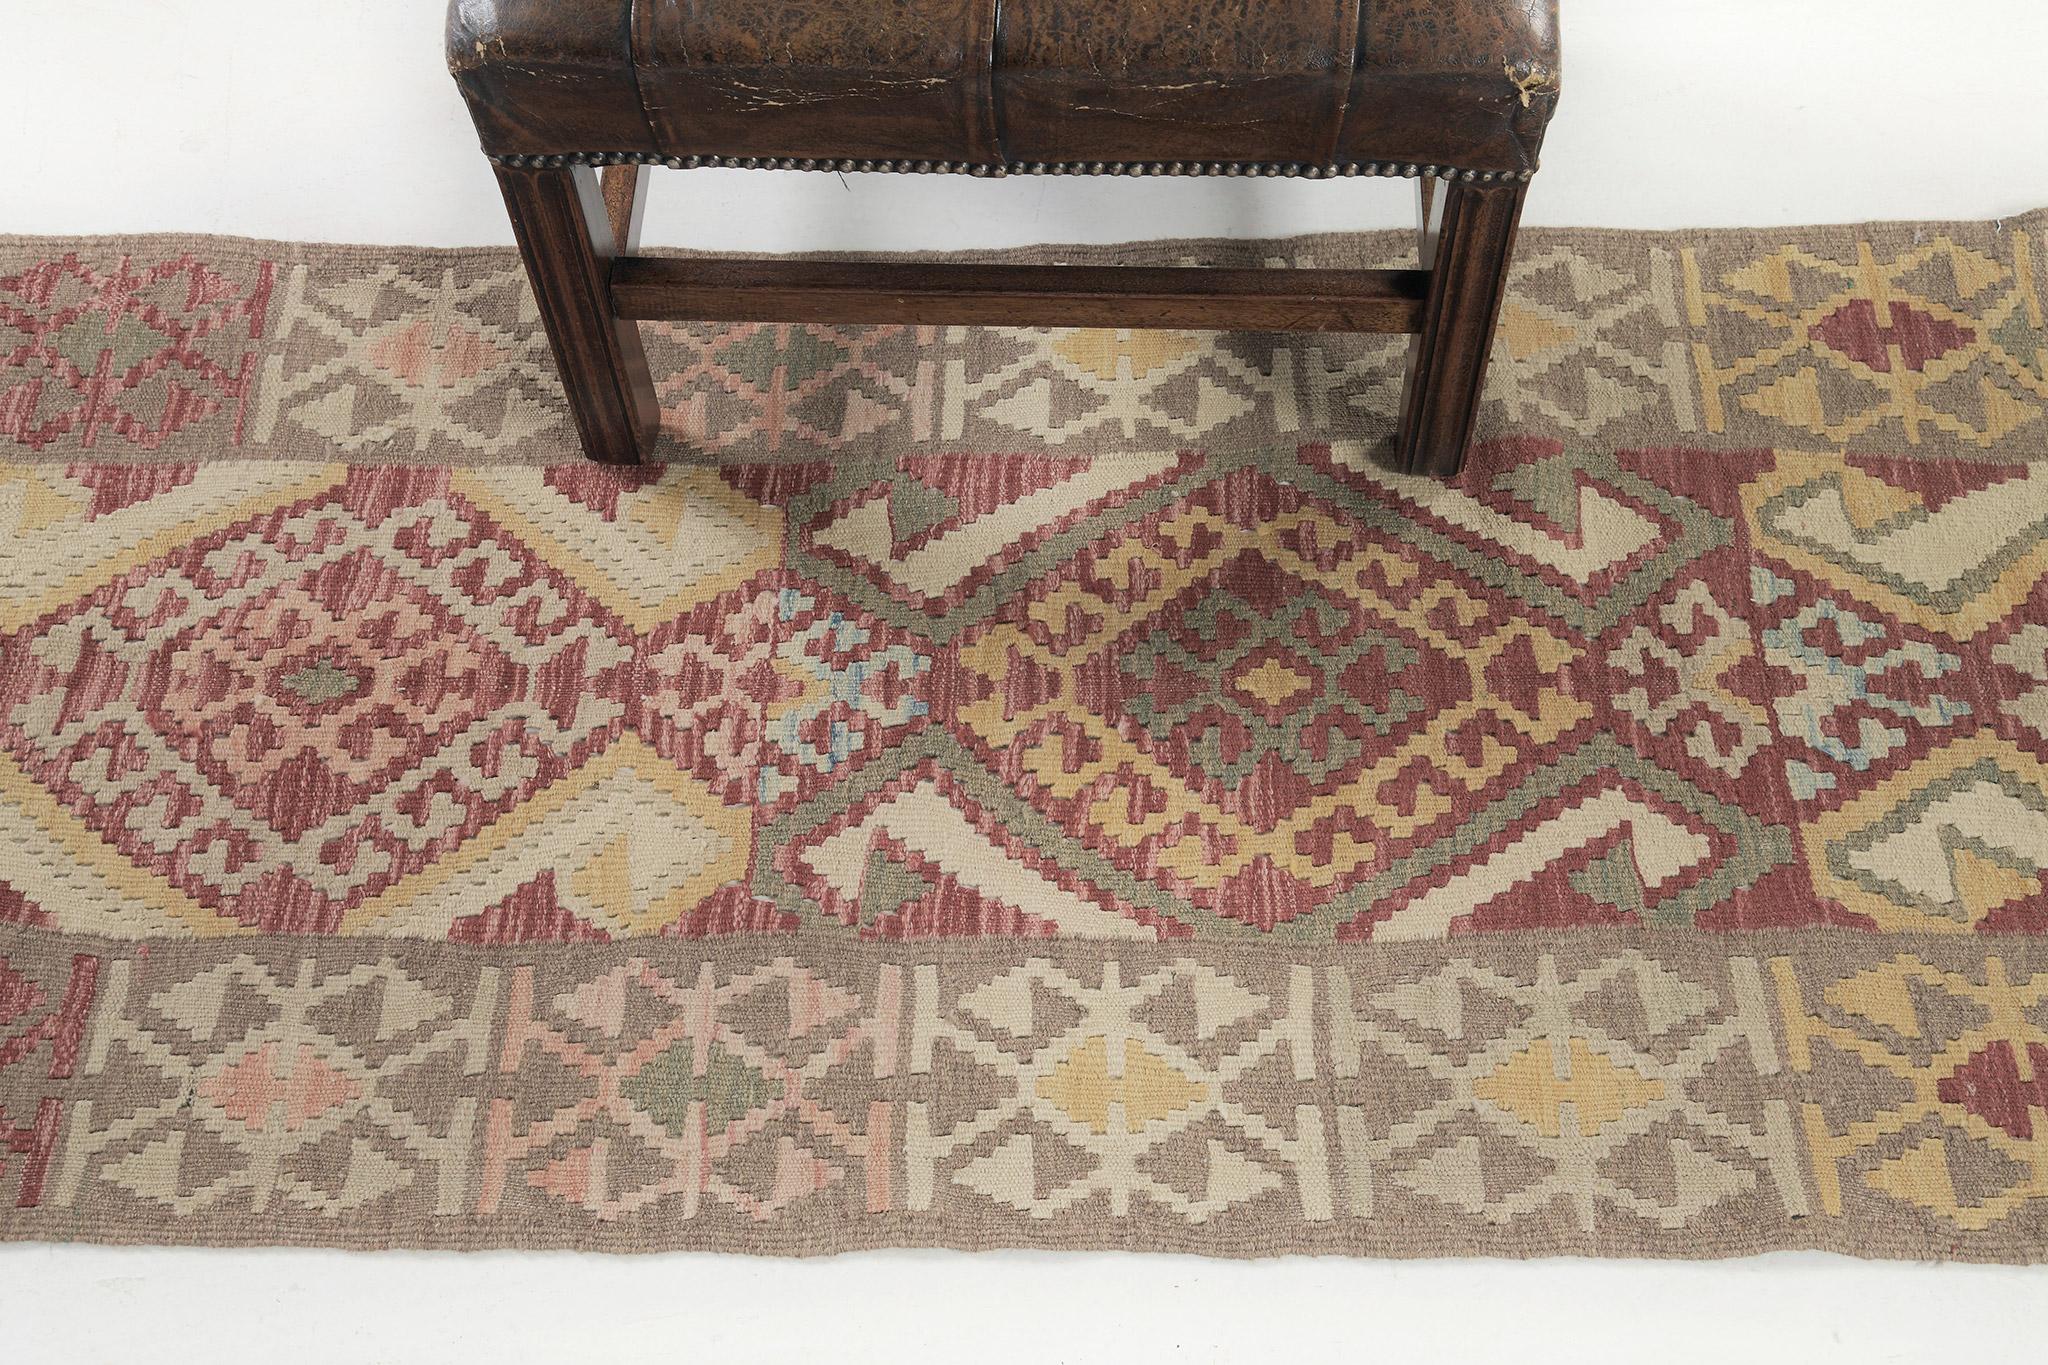 A vintage style flatweave Kilim rug that stars the majestic tones of red, yellow, and khaki. The field is covered with tribal motifs that are composed of wolf's mouths and triangles. The emanating timeless appeal and inimitable warmth are the answer